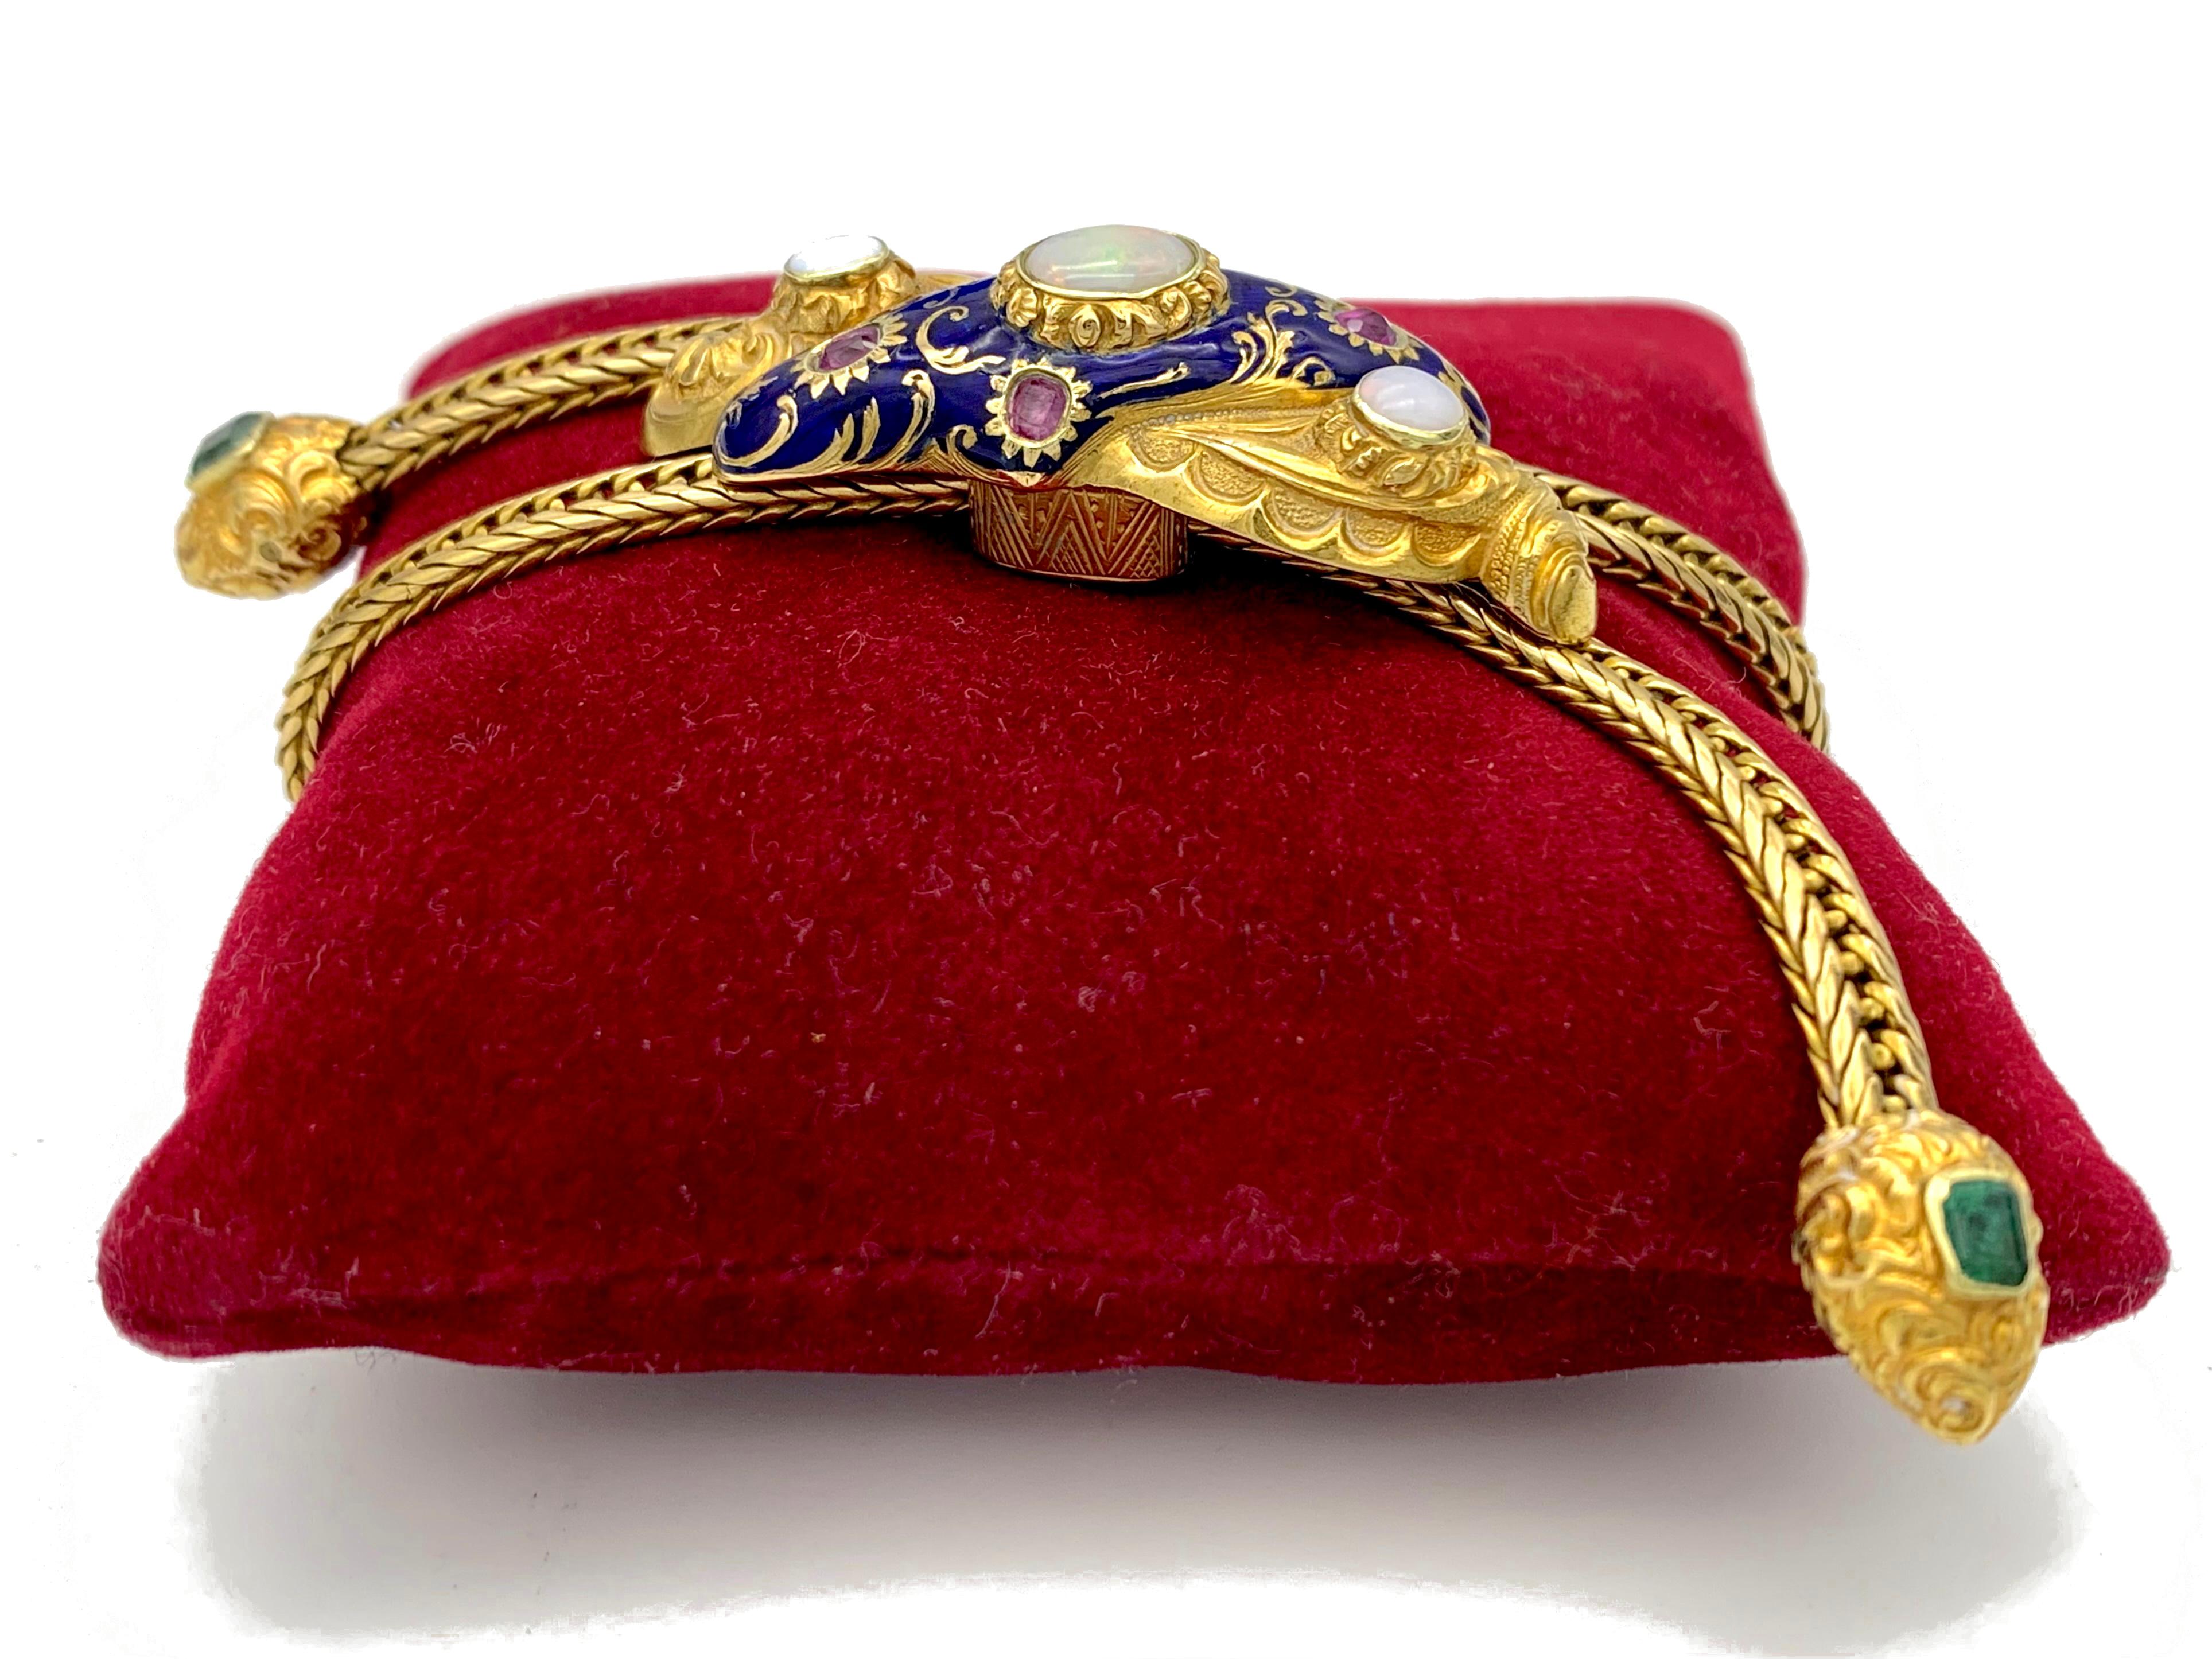 This unusual bracelet features a wonderful navy blue enamelled slide designed as a bow.. The jewel is set with rubies and opals and decorated with acanthus leaves and other foliage. The solid flexible chain terminates into two heart shaped elements